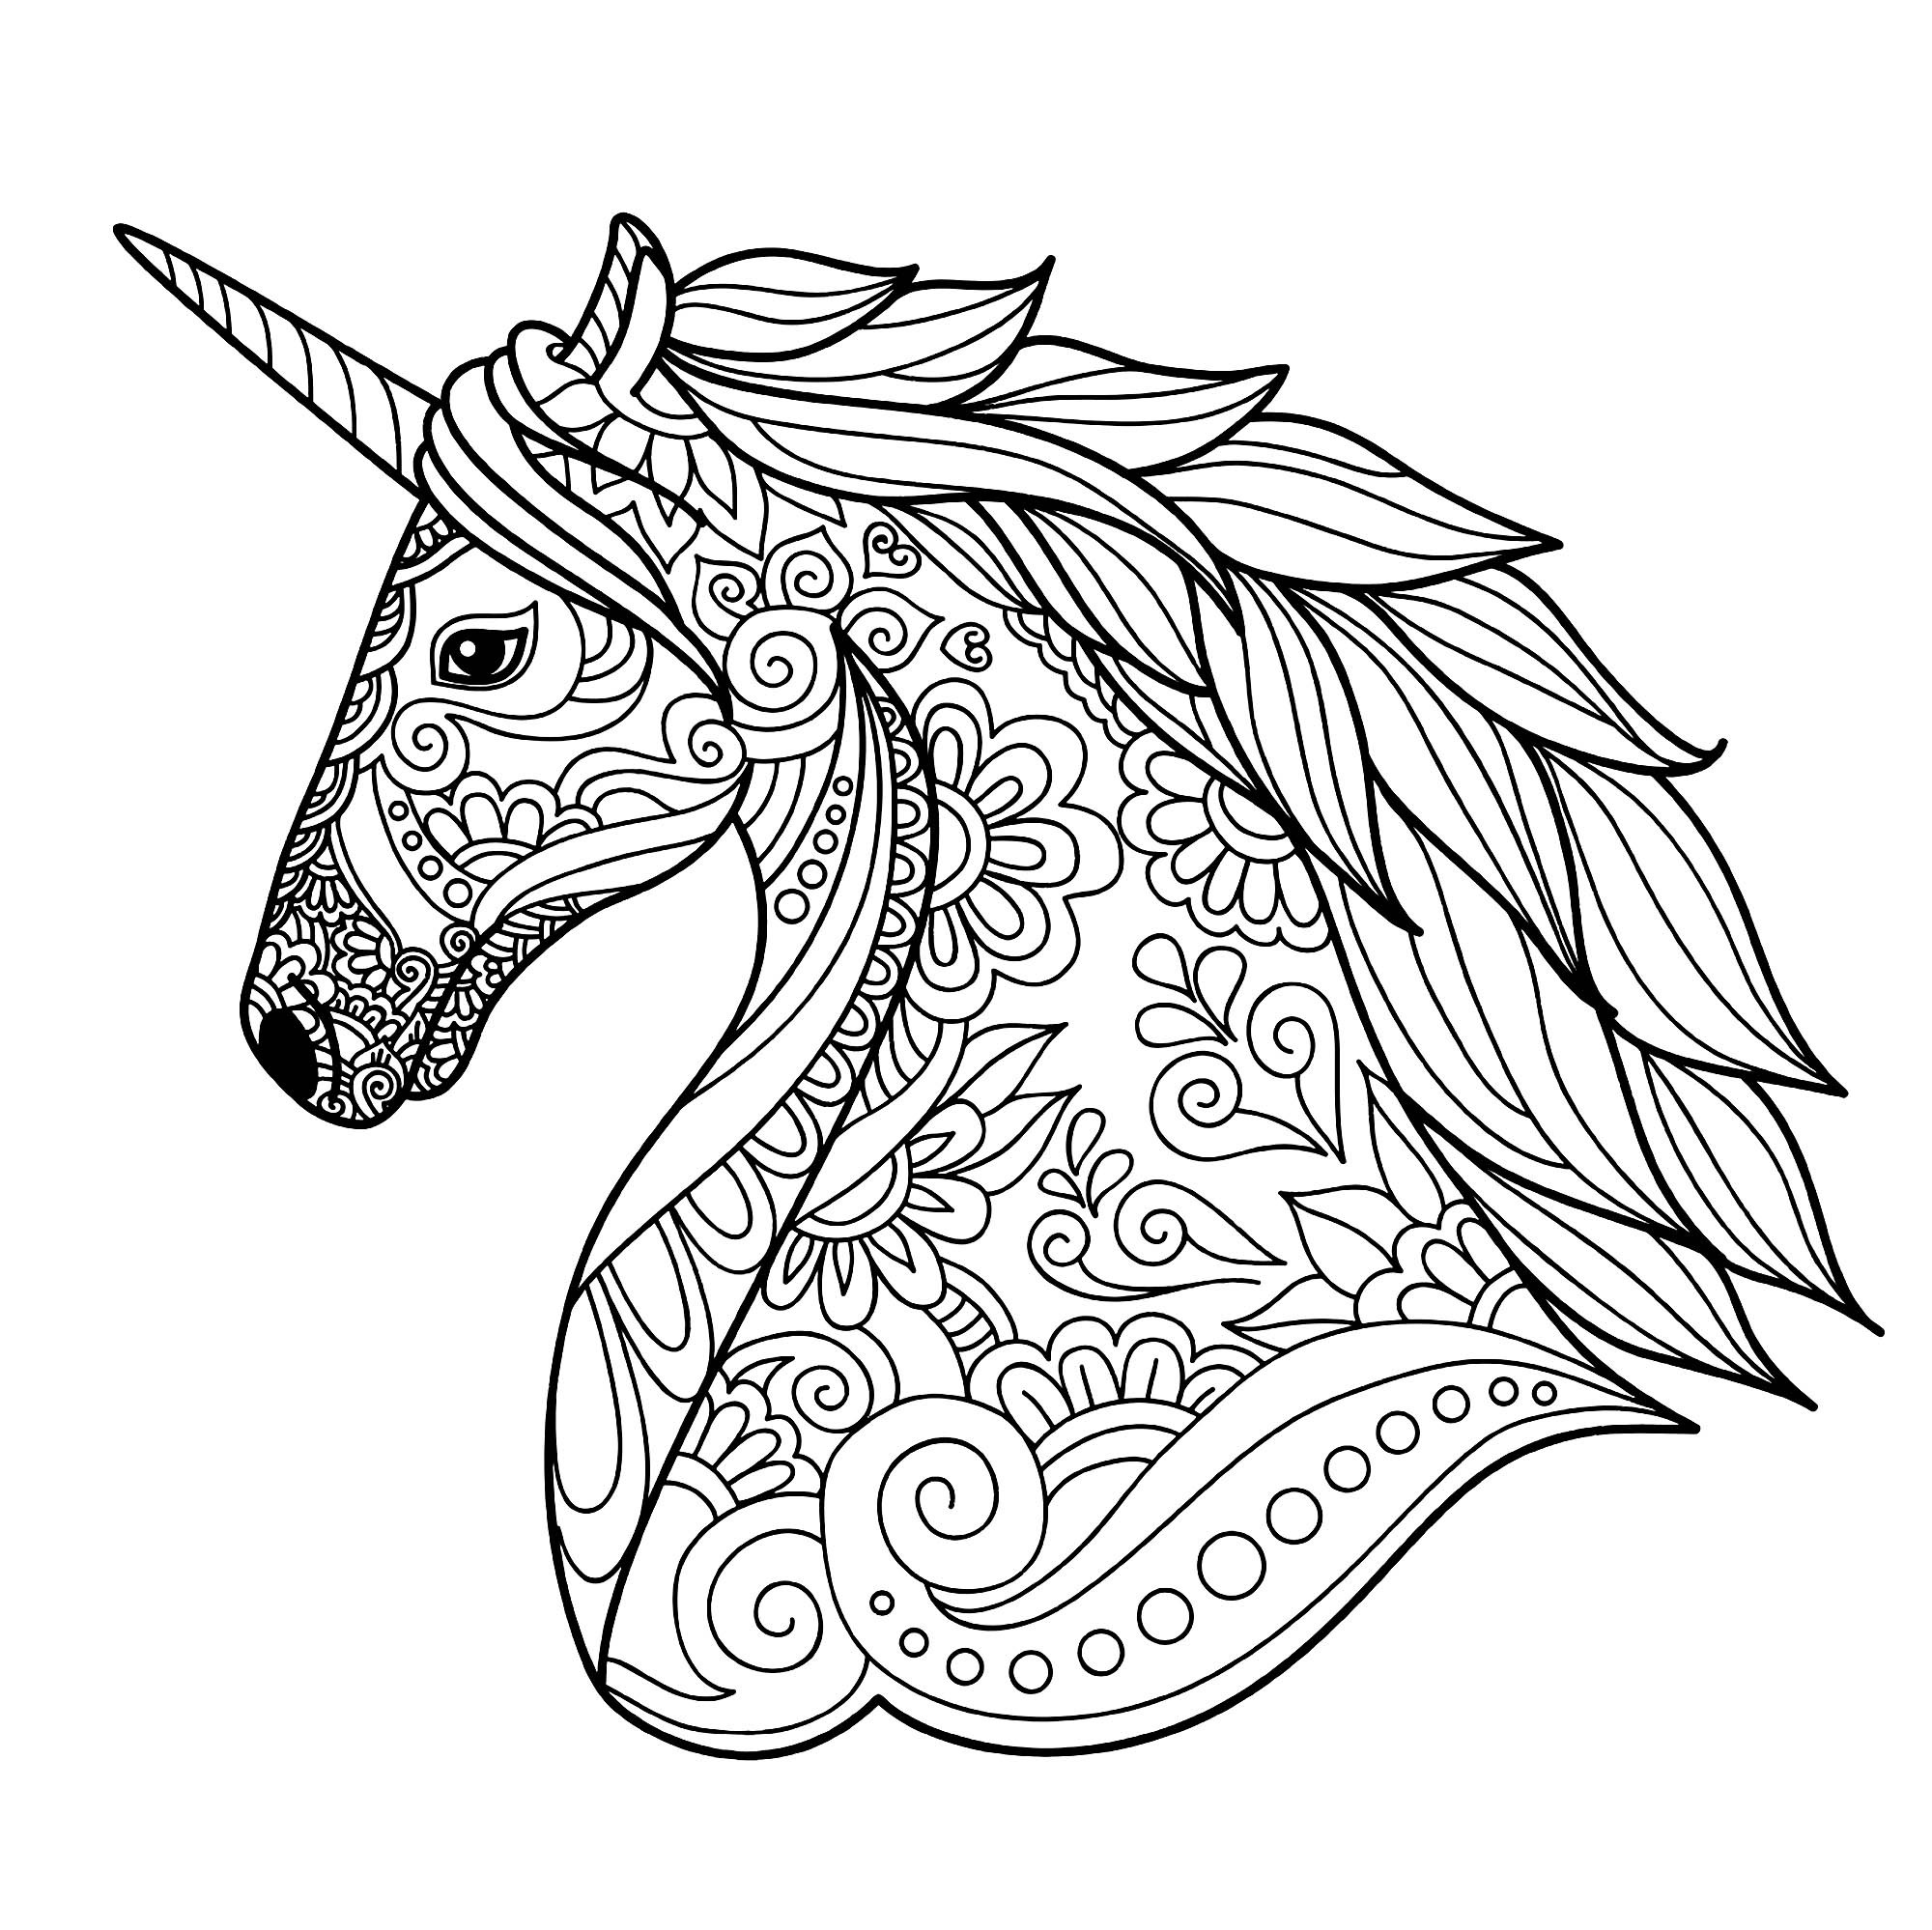 Kids Coloring Pages Unicorn
 Unicorns free to color for children Unicorns Kids